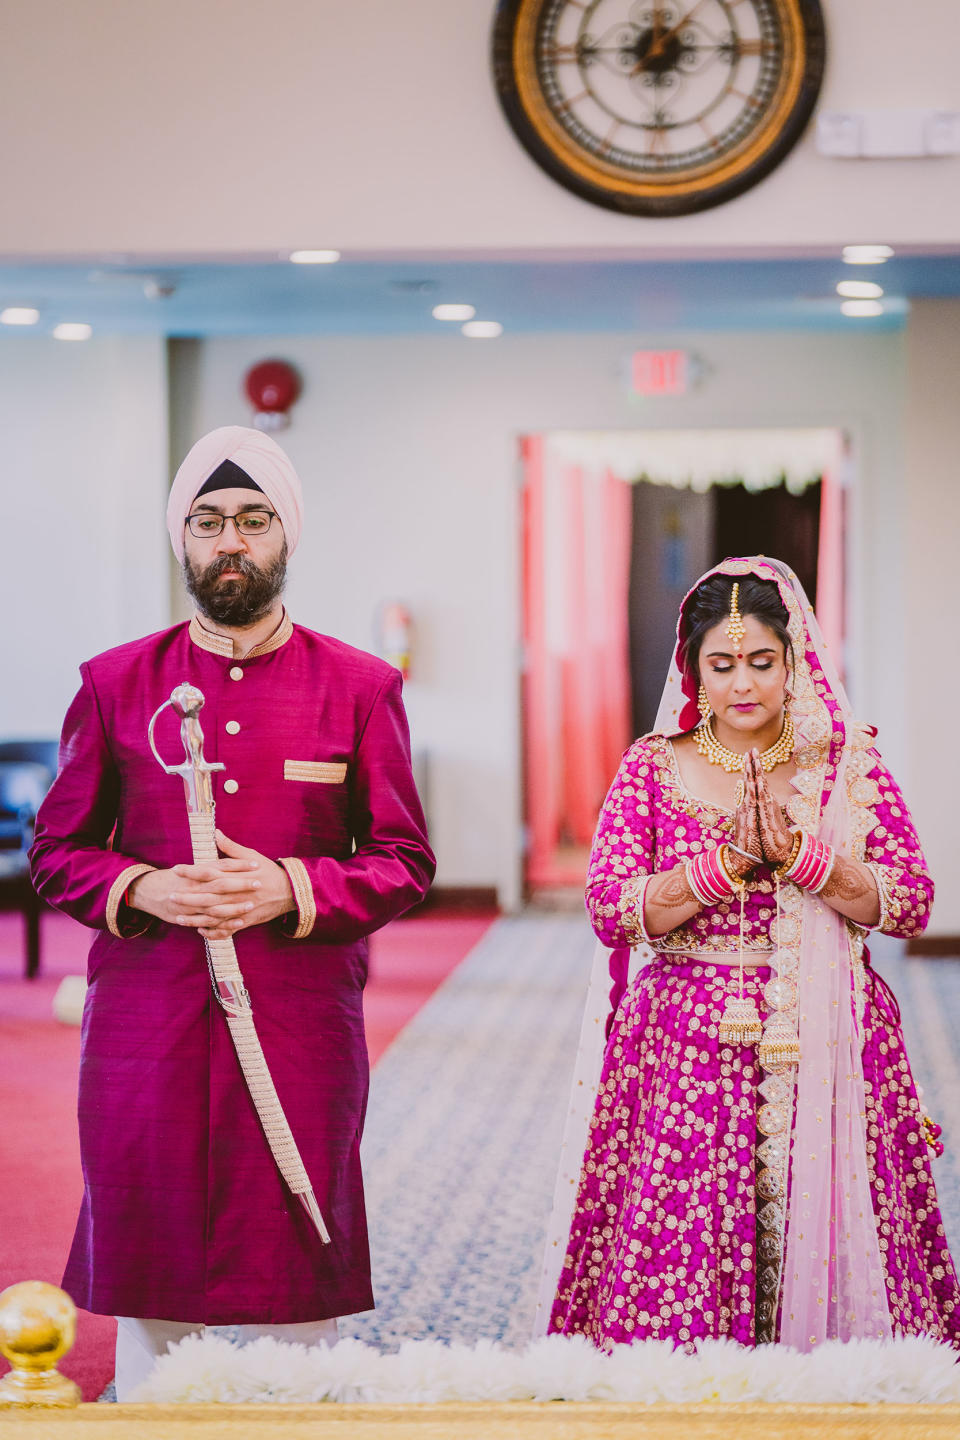 Rupam and Nitin doing Ardas, a prayer to seek blessings after the Sikh wedding ceremony, called the Anand Karaj. (A.S. Nagpal Photography)